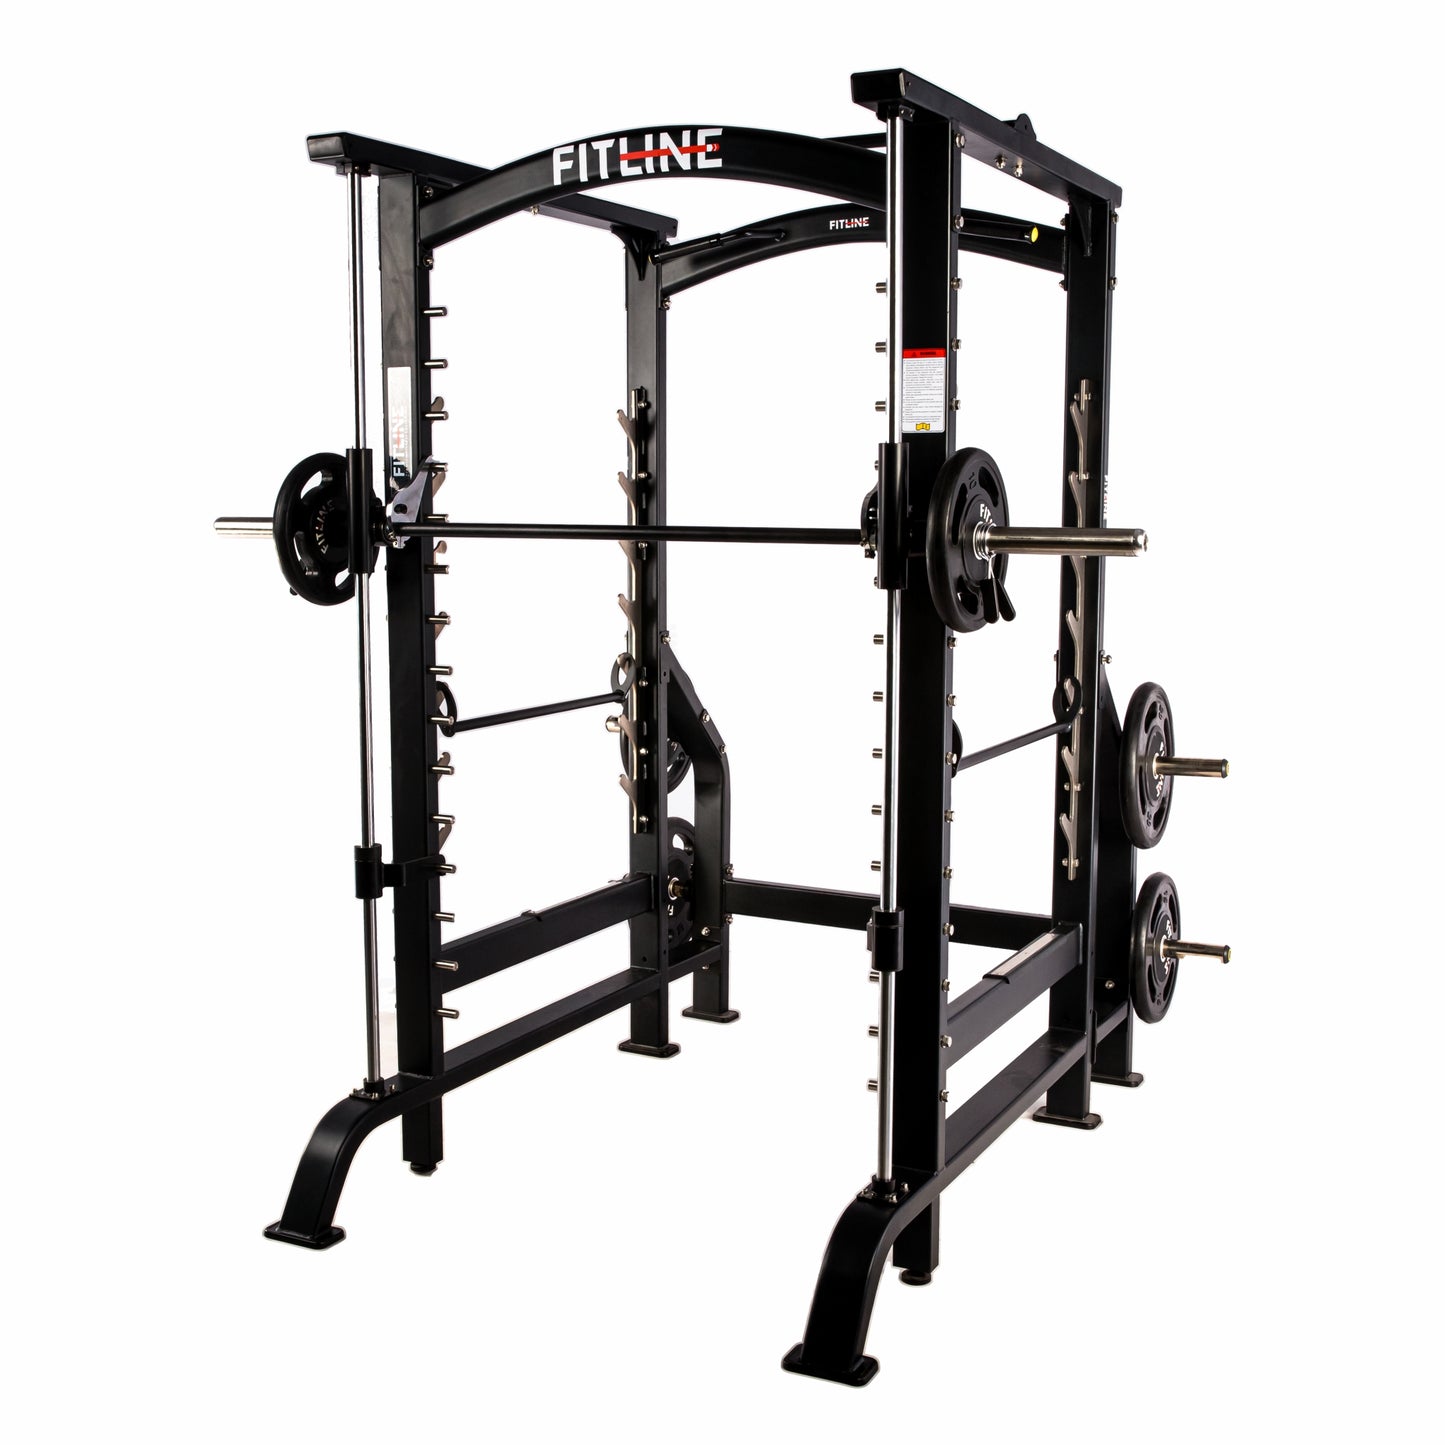 MV-20A - SMITH MACHINE WITH SQUAT RACK - Fitline India